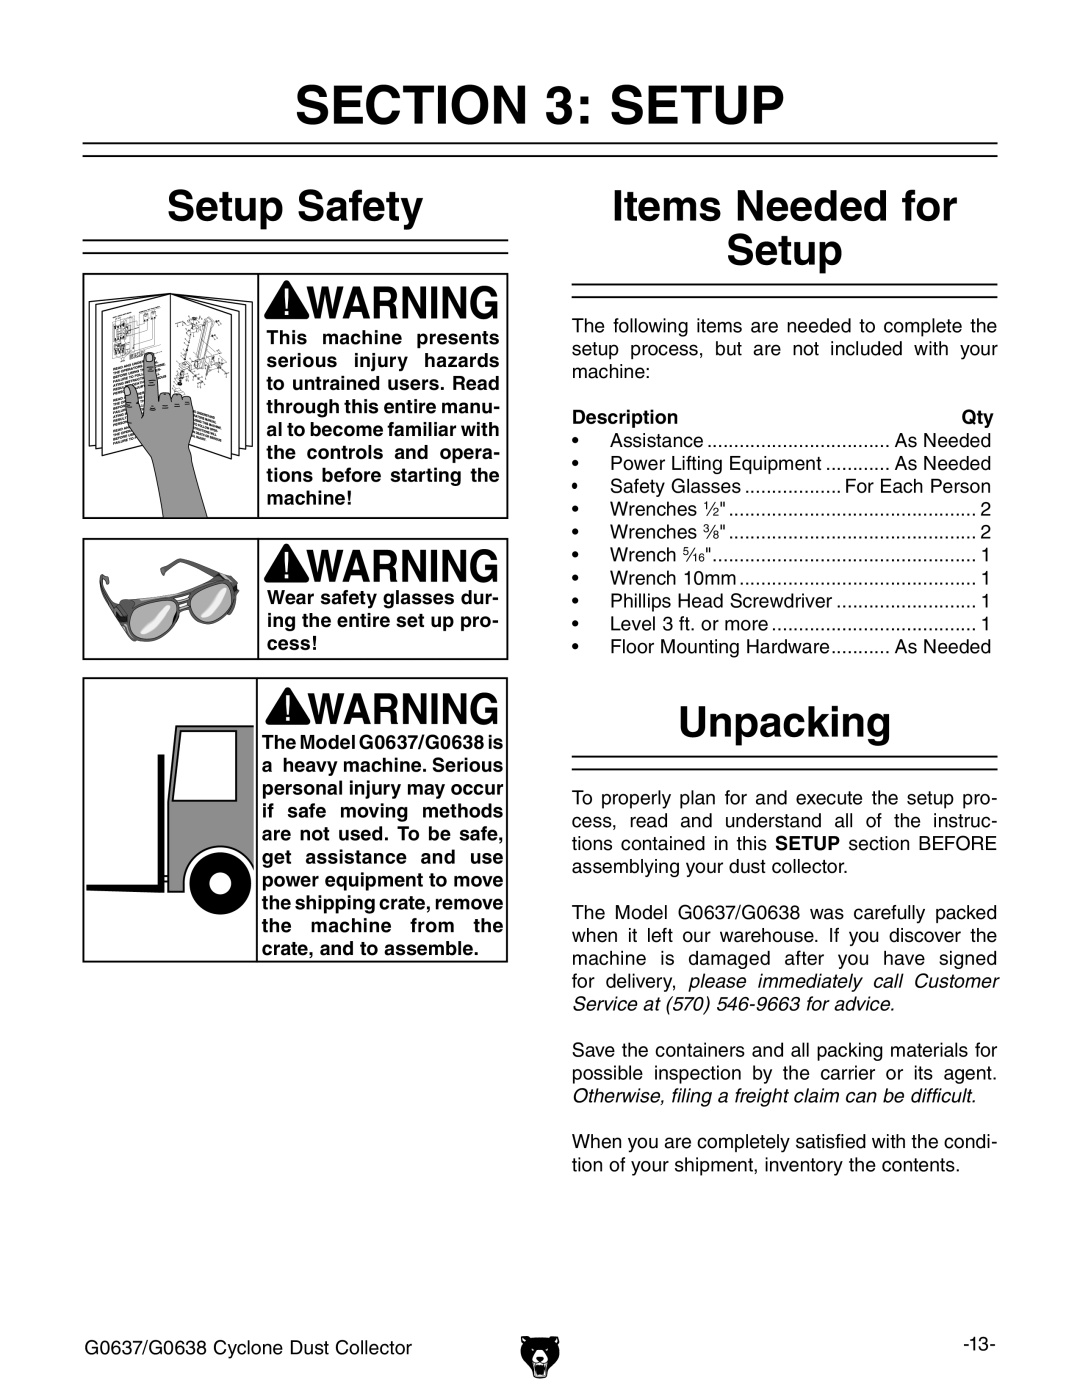 Grizzly G0638, G0637 owner manual Setup Safety, Items Needed for Setup, Unpacking 